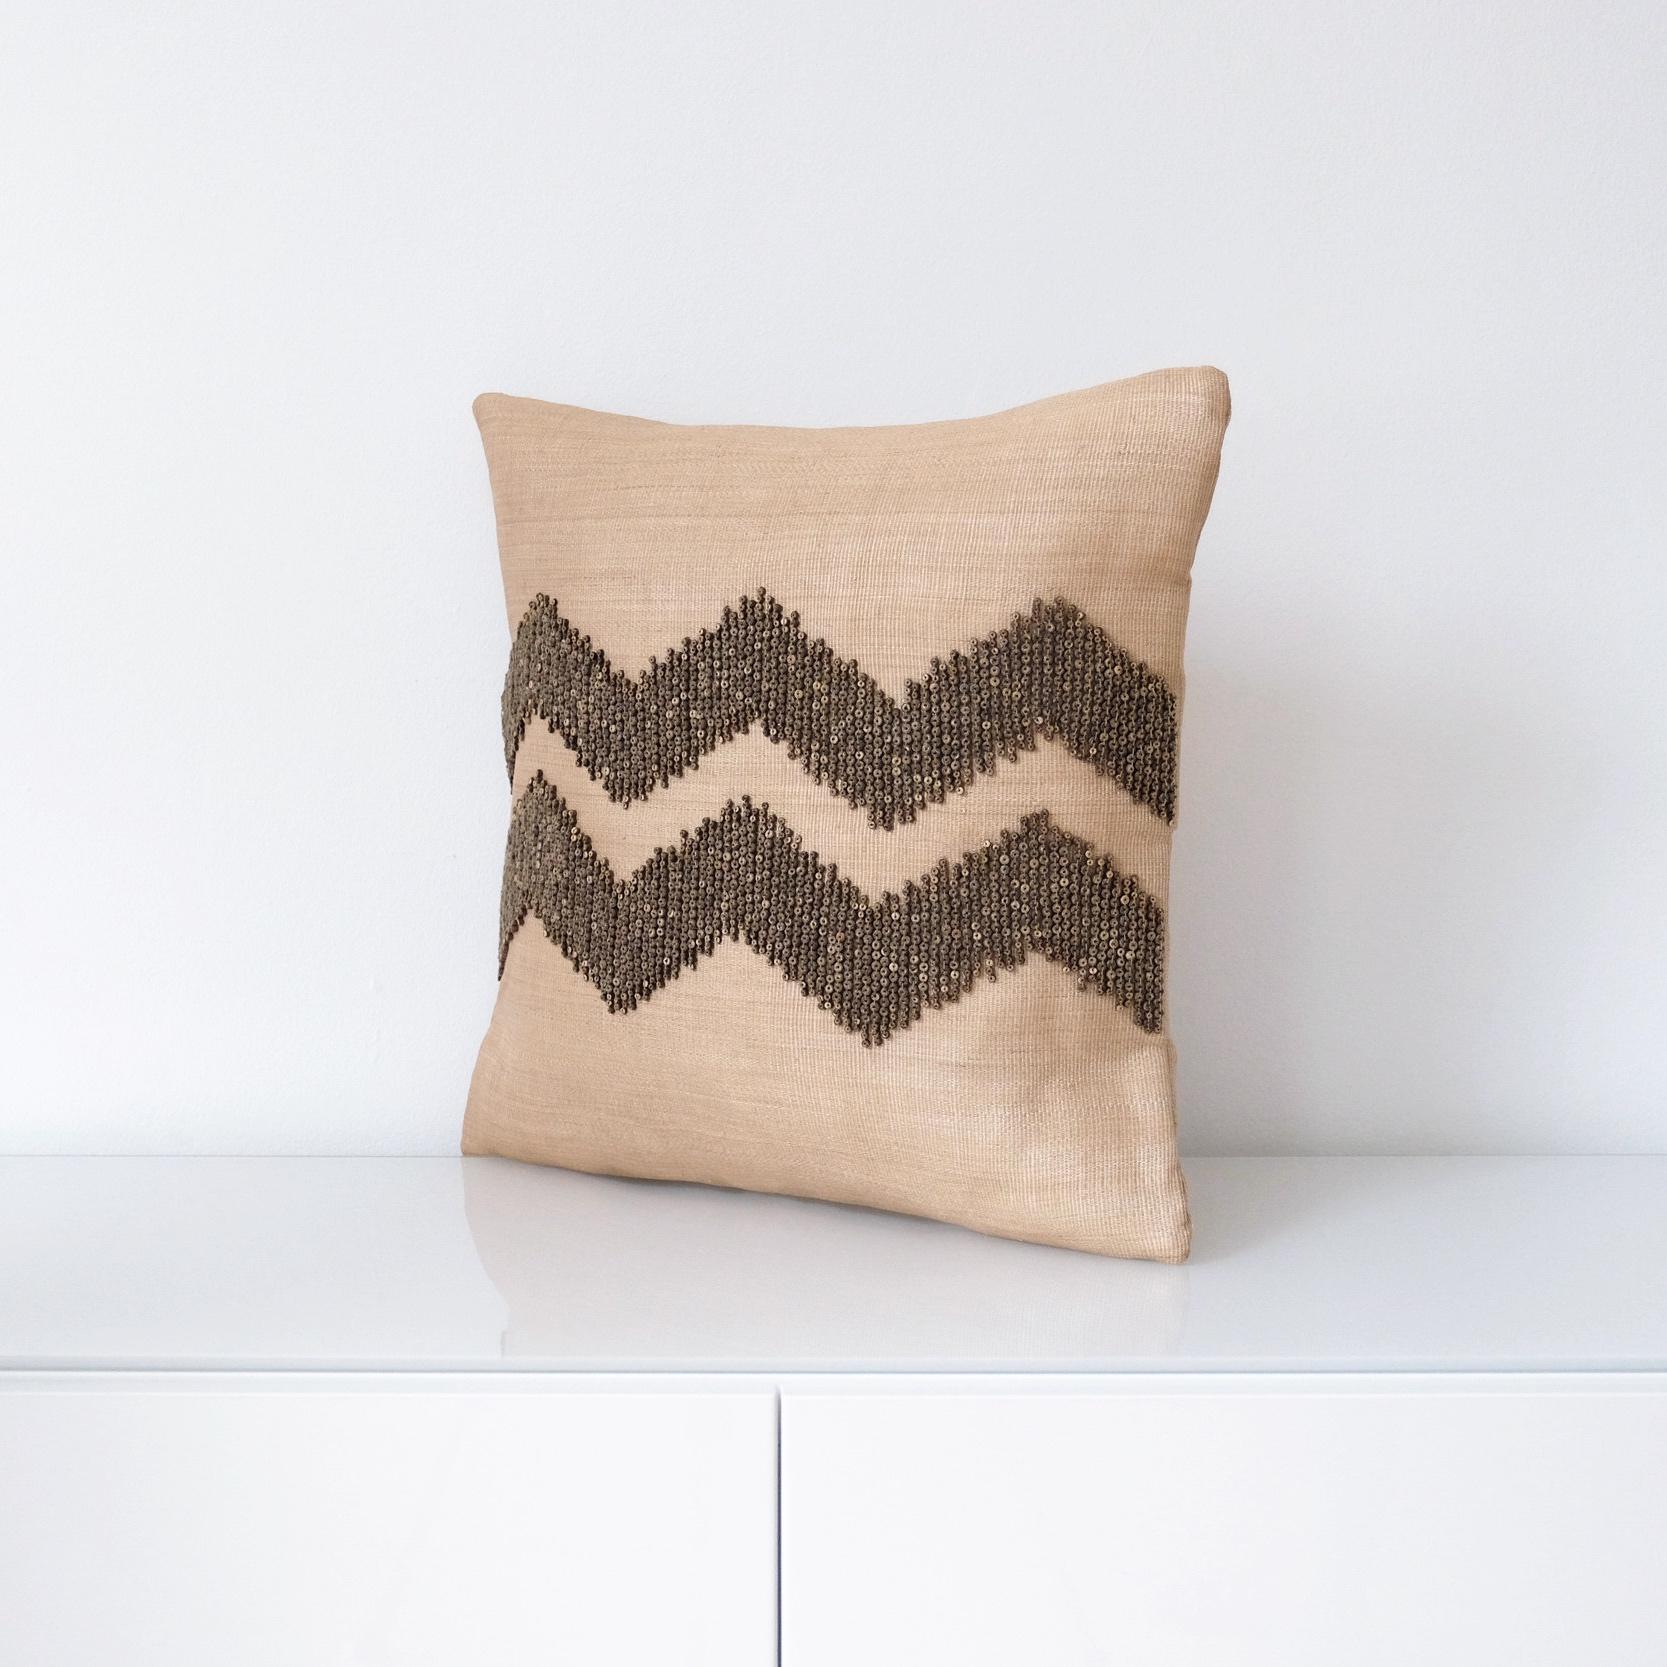 Handcrafted cushion cover made with naturally dyed and delicately woven T’nalak cloth from Abaca fibres and fastened with coconut shell buttons
Colour: terracotta and brown

Measures: 45 x 45 cm
17.7? x 17.7?
Recommended cushion filler: 56 x 56